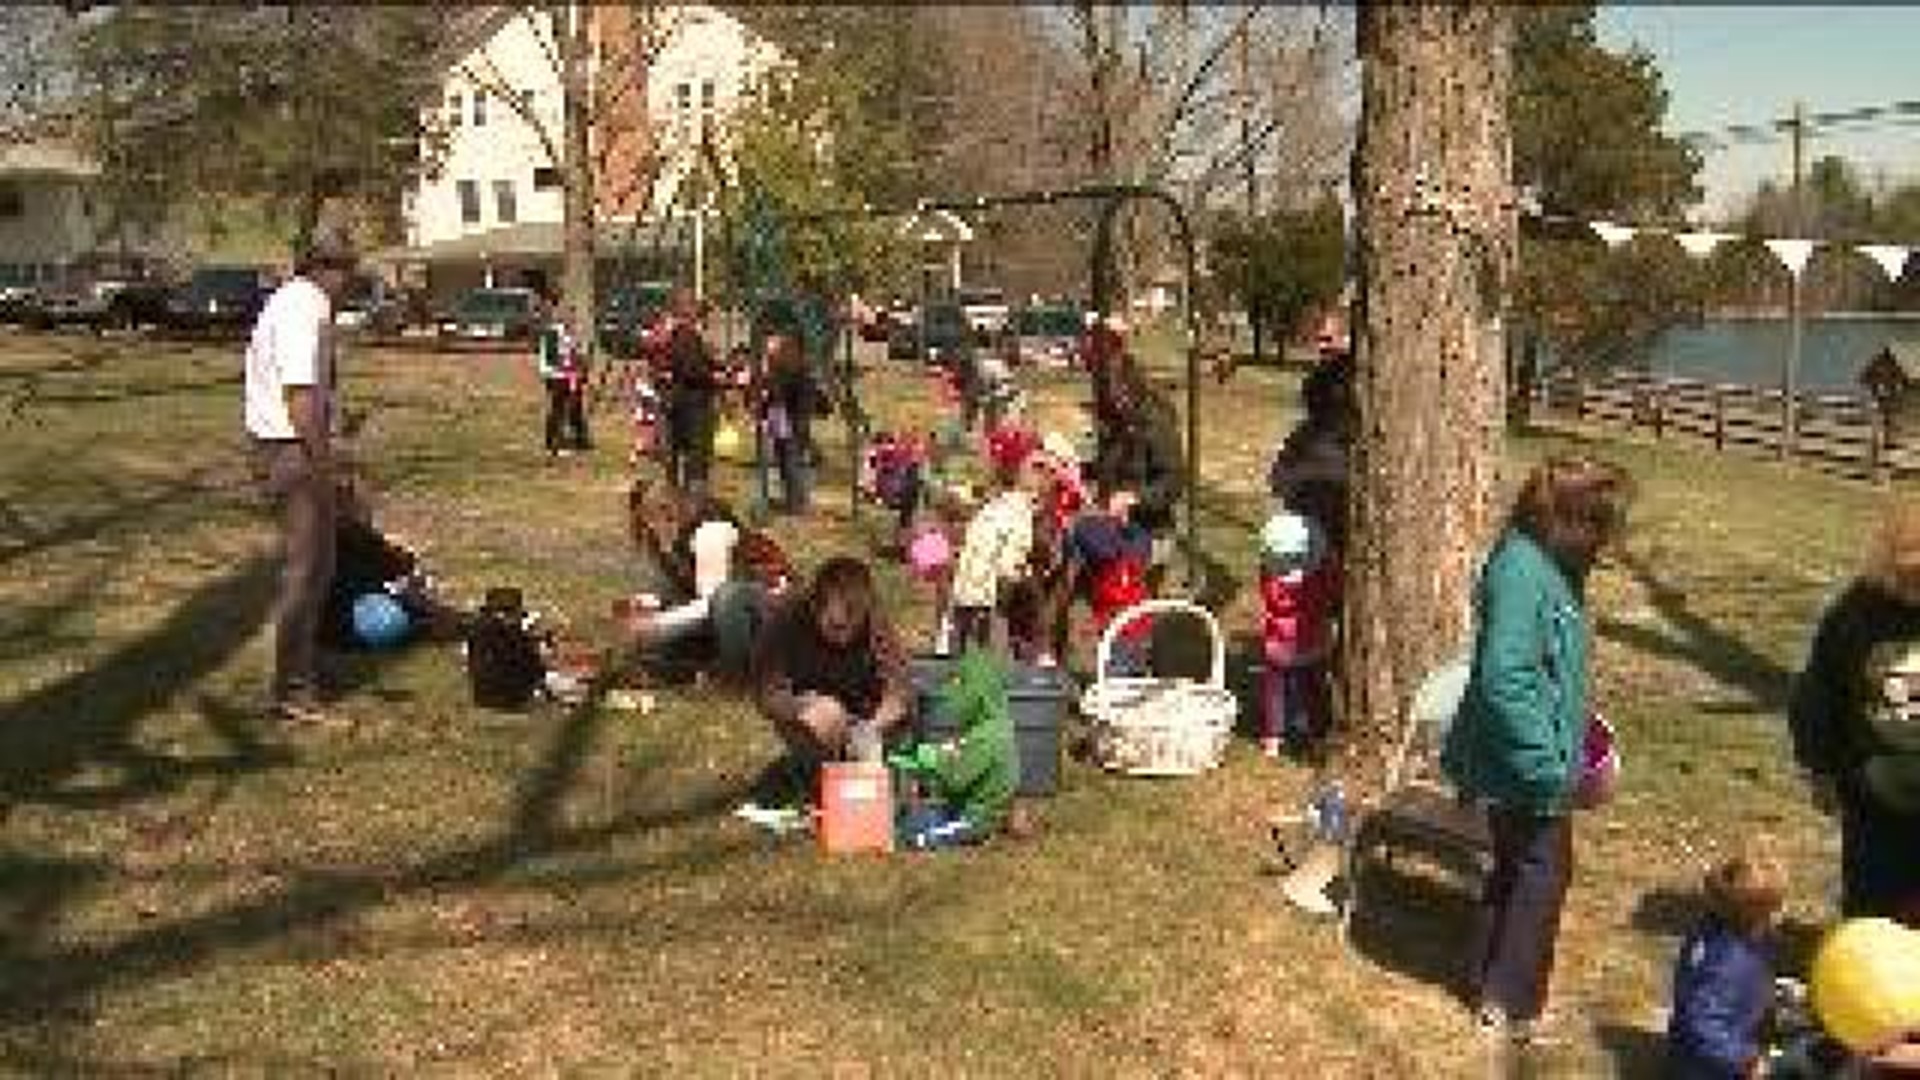 Ministry Hosts First Annual Egg Hunt